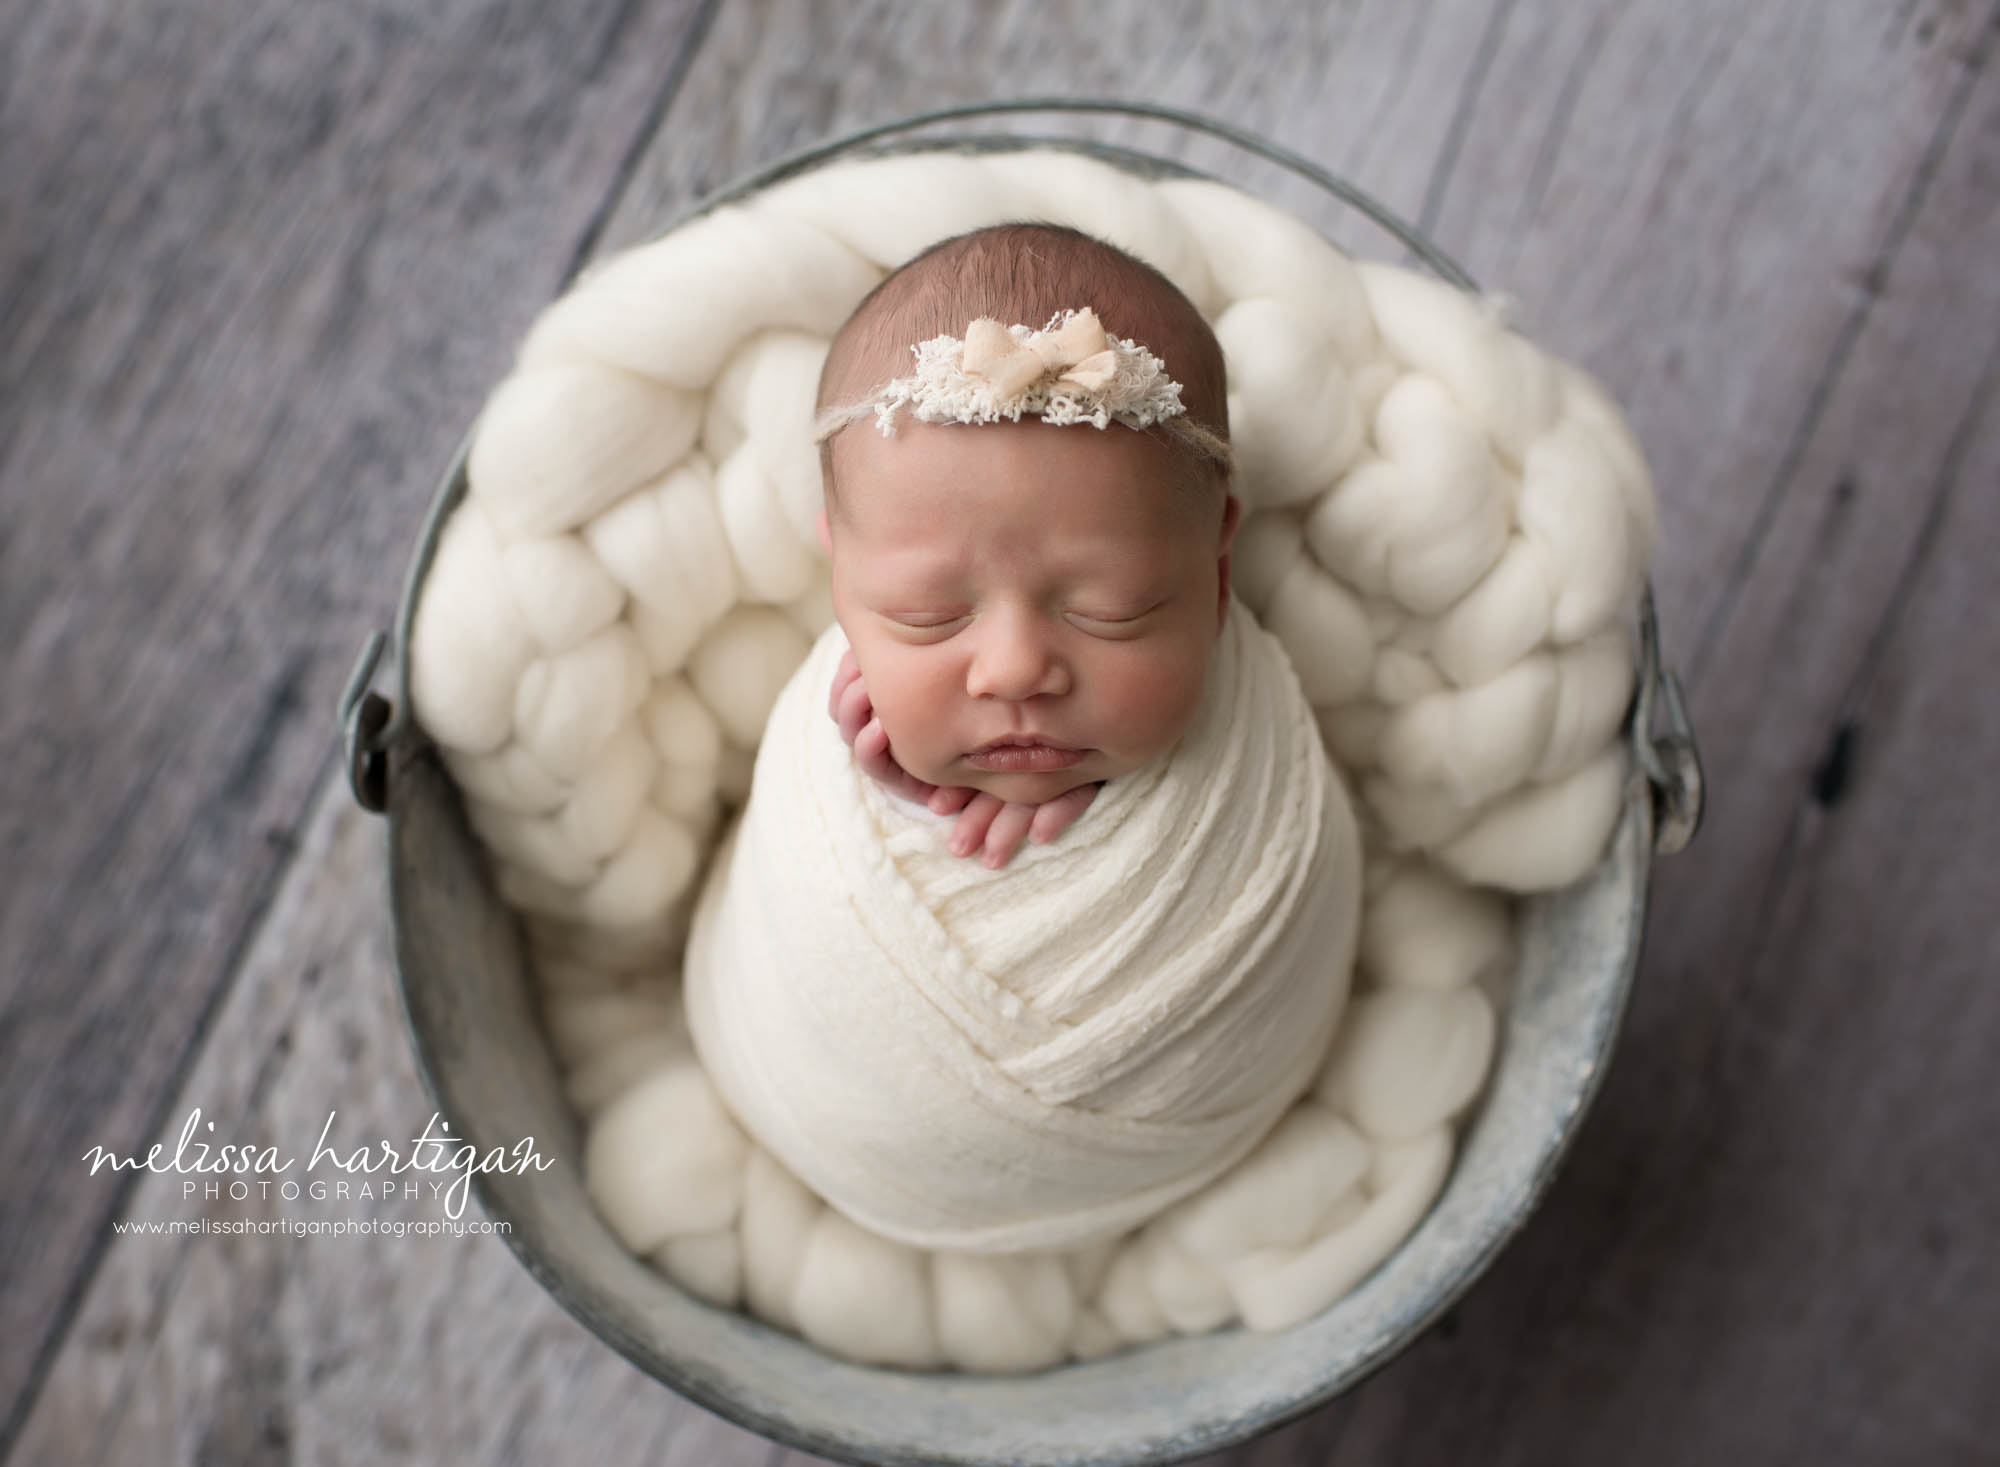 Baby girl wrapped in cream wrap placed in bucket